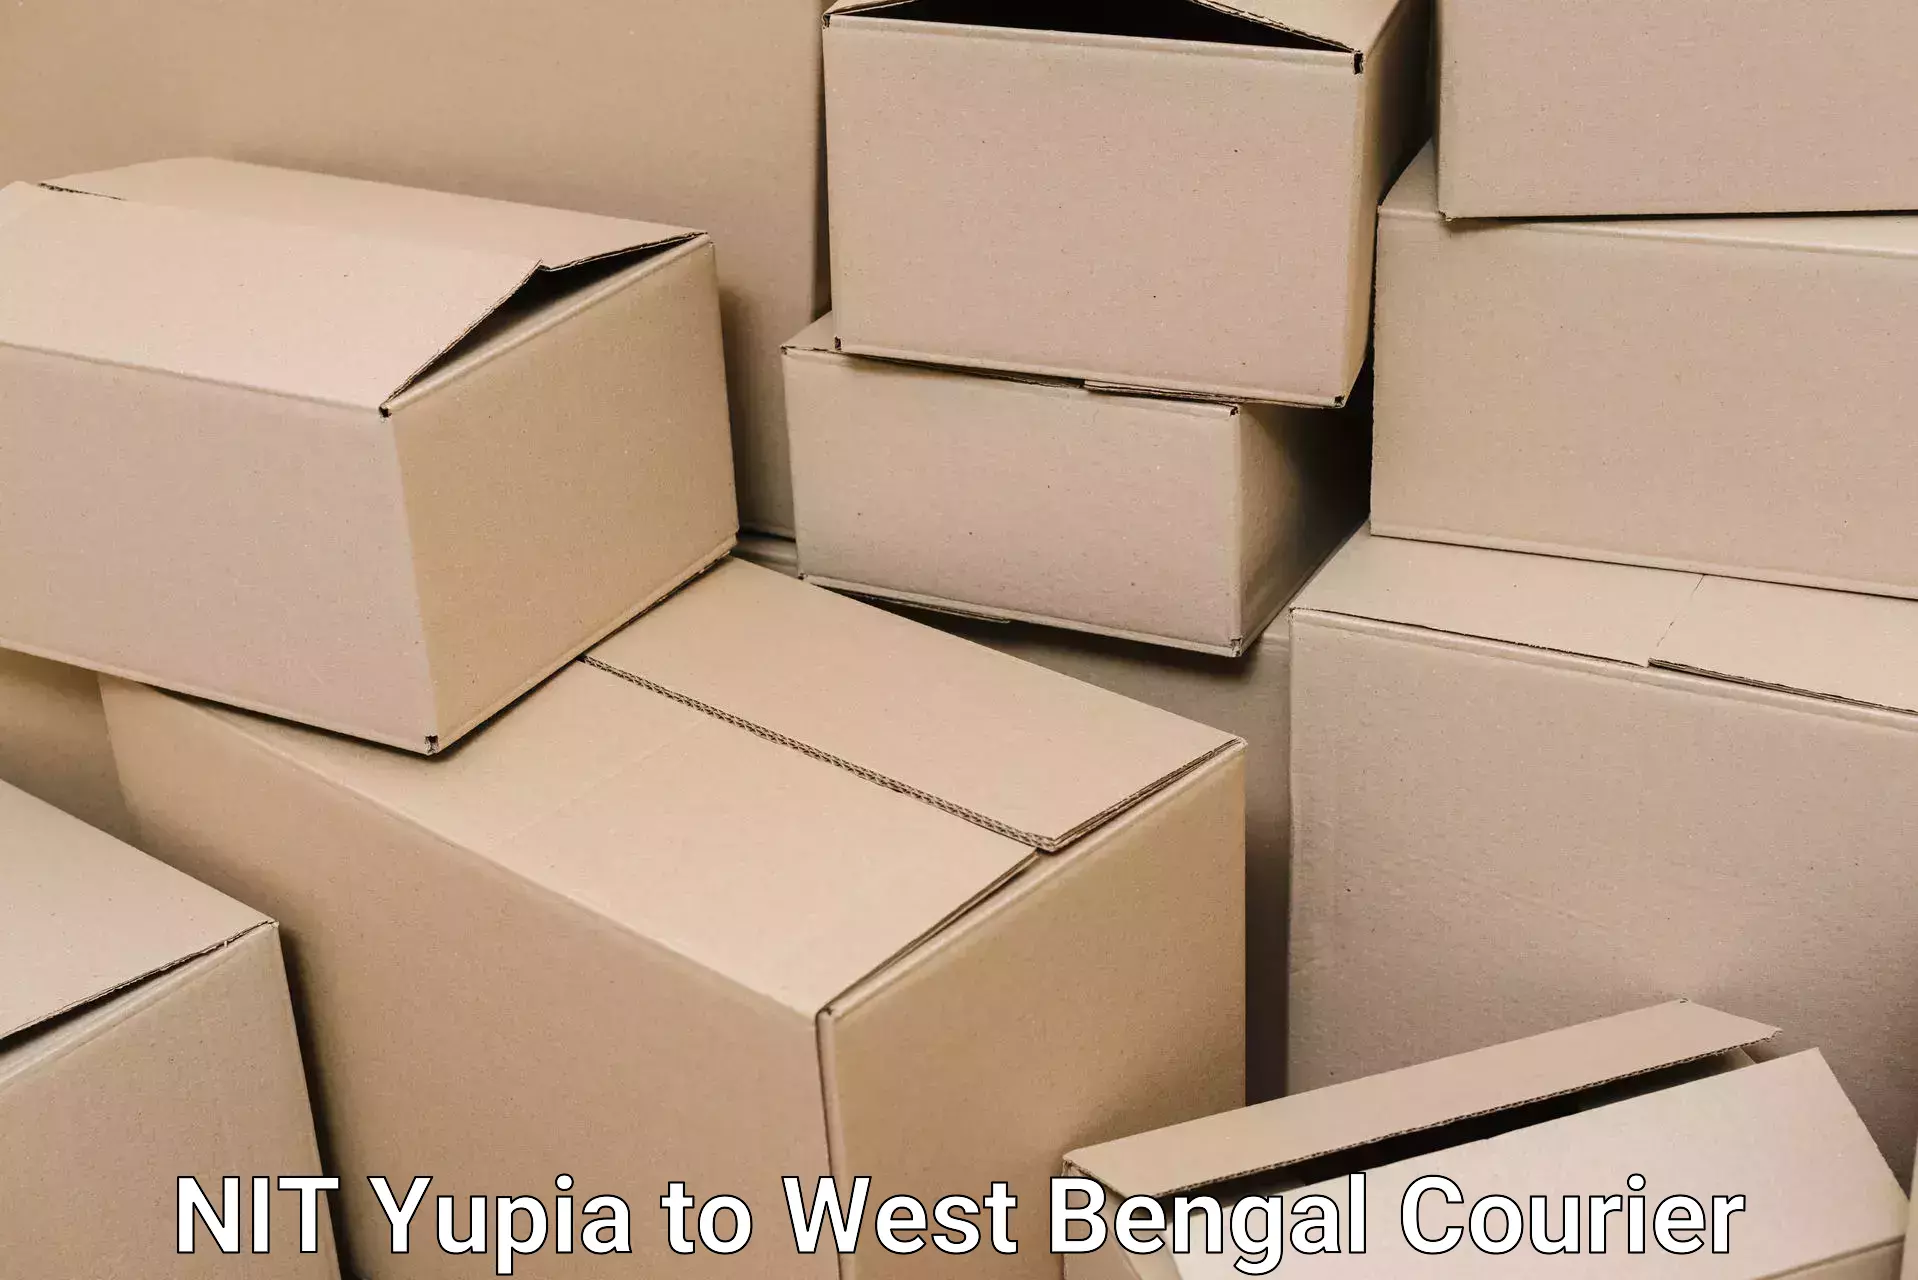 Professional packing services in NIT Yupia to West Bengal